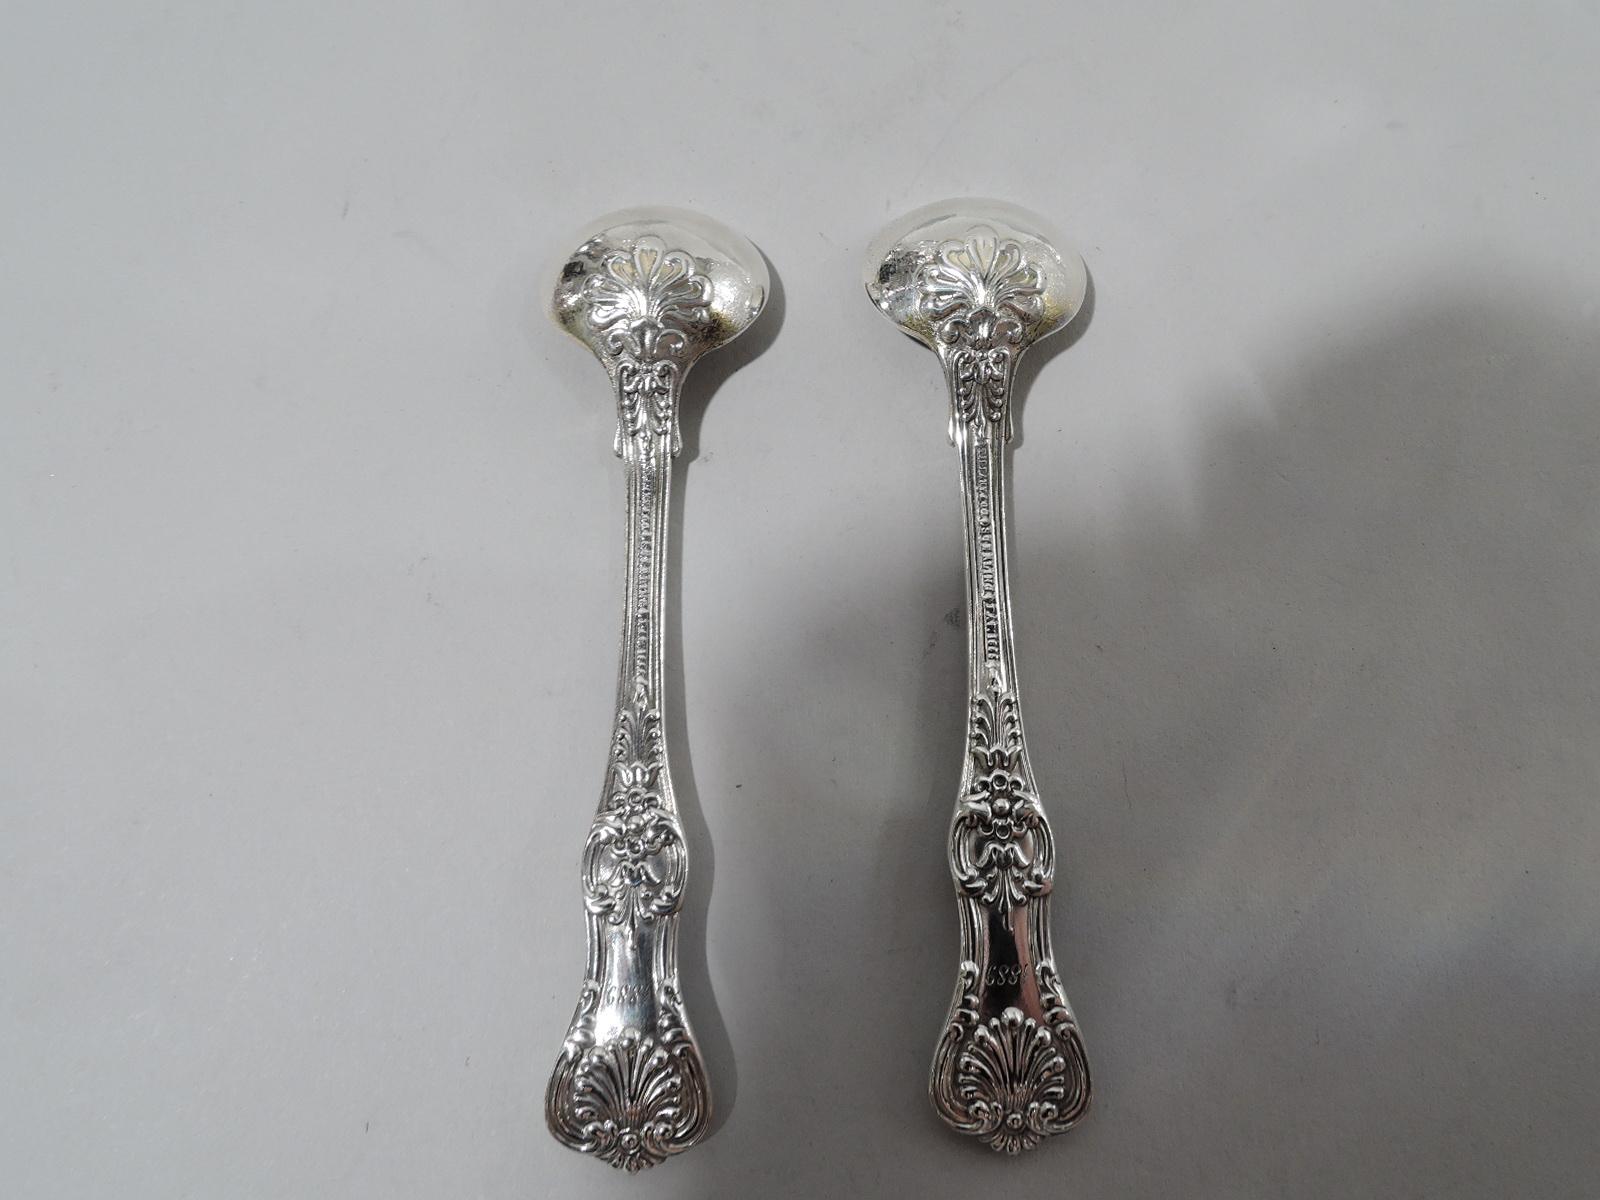 Pair of English King sterling silver master salt spoons. Made by Tiffany & Co. in New York, ca 1885. Each: Tapering and waisted terminal with double-sided scallop shells and flowers. Engraved script monogram (front) and year 1889 (back). Round bowl.